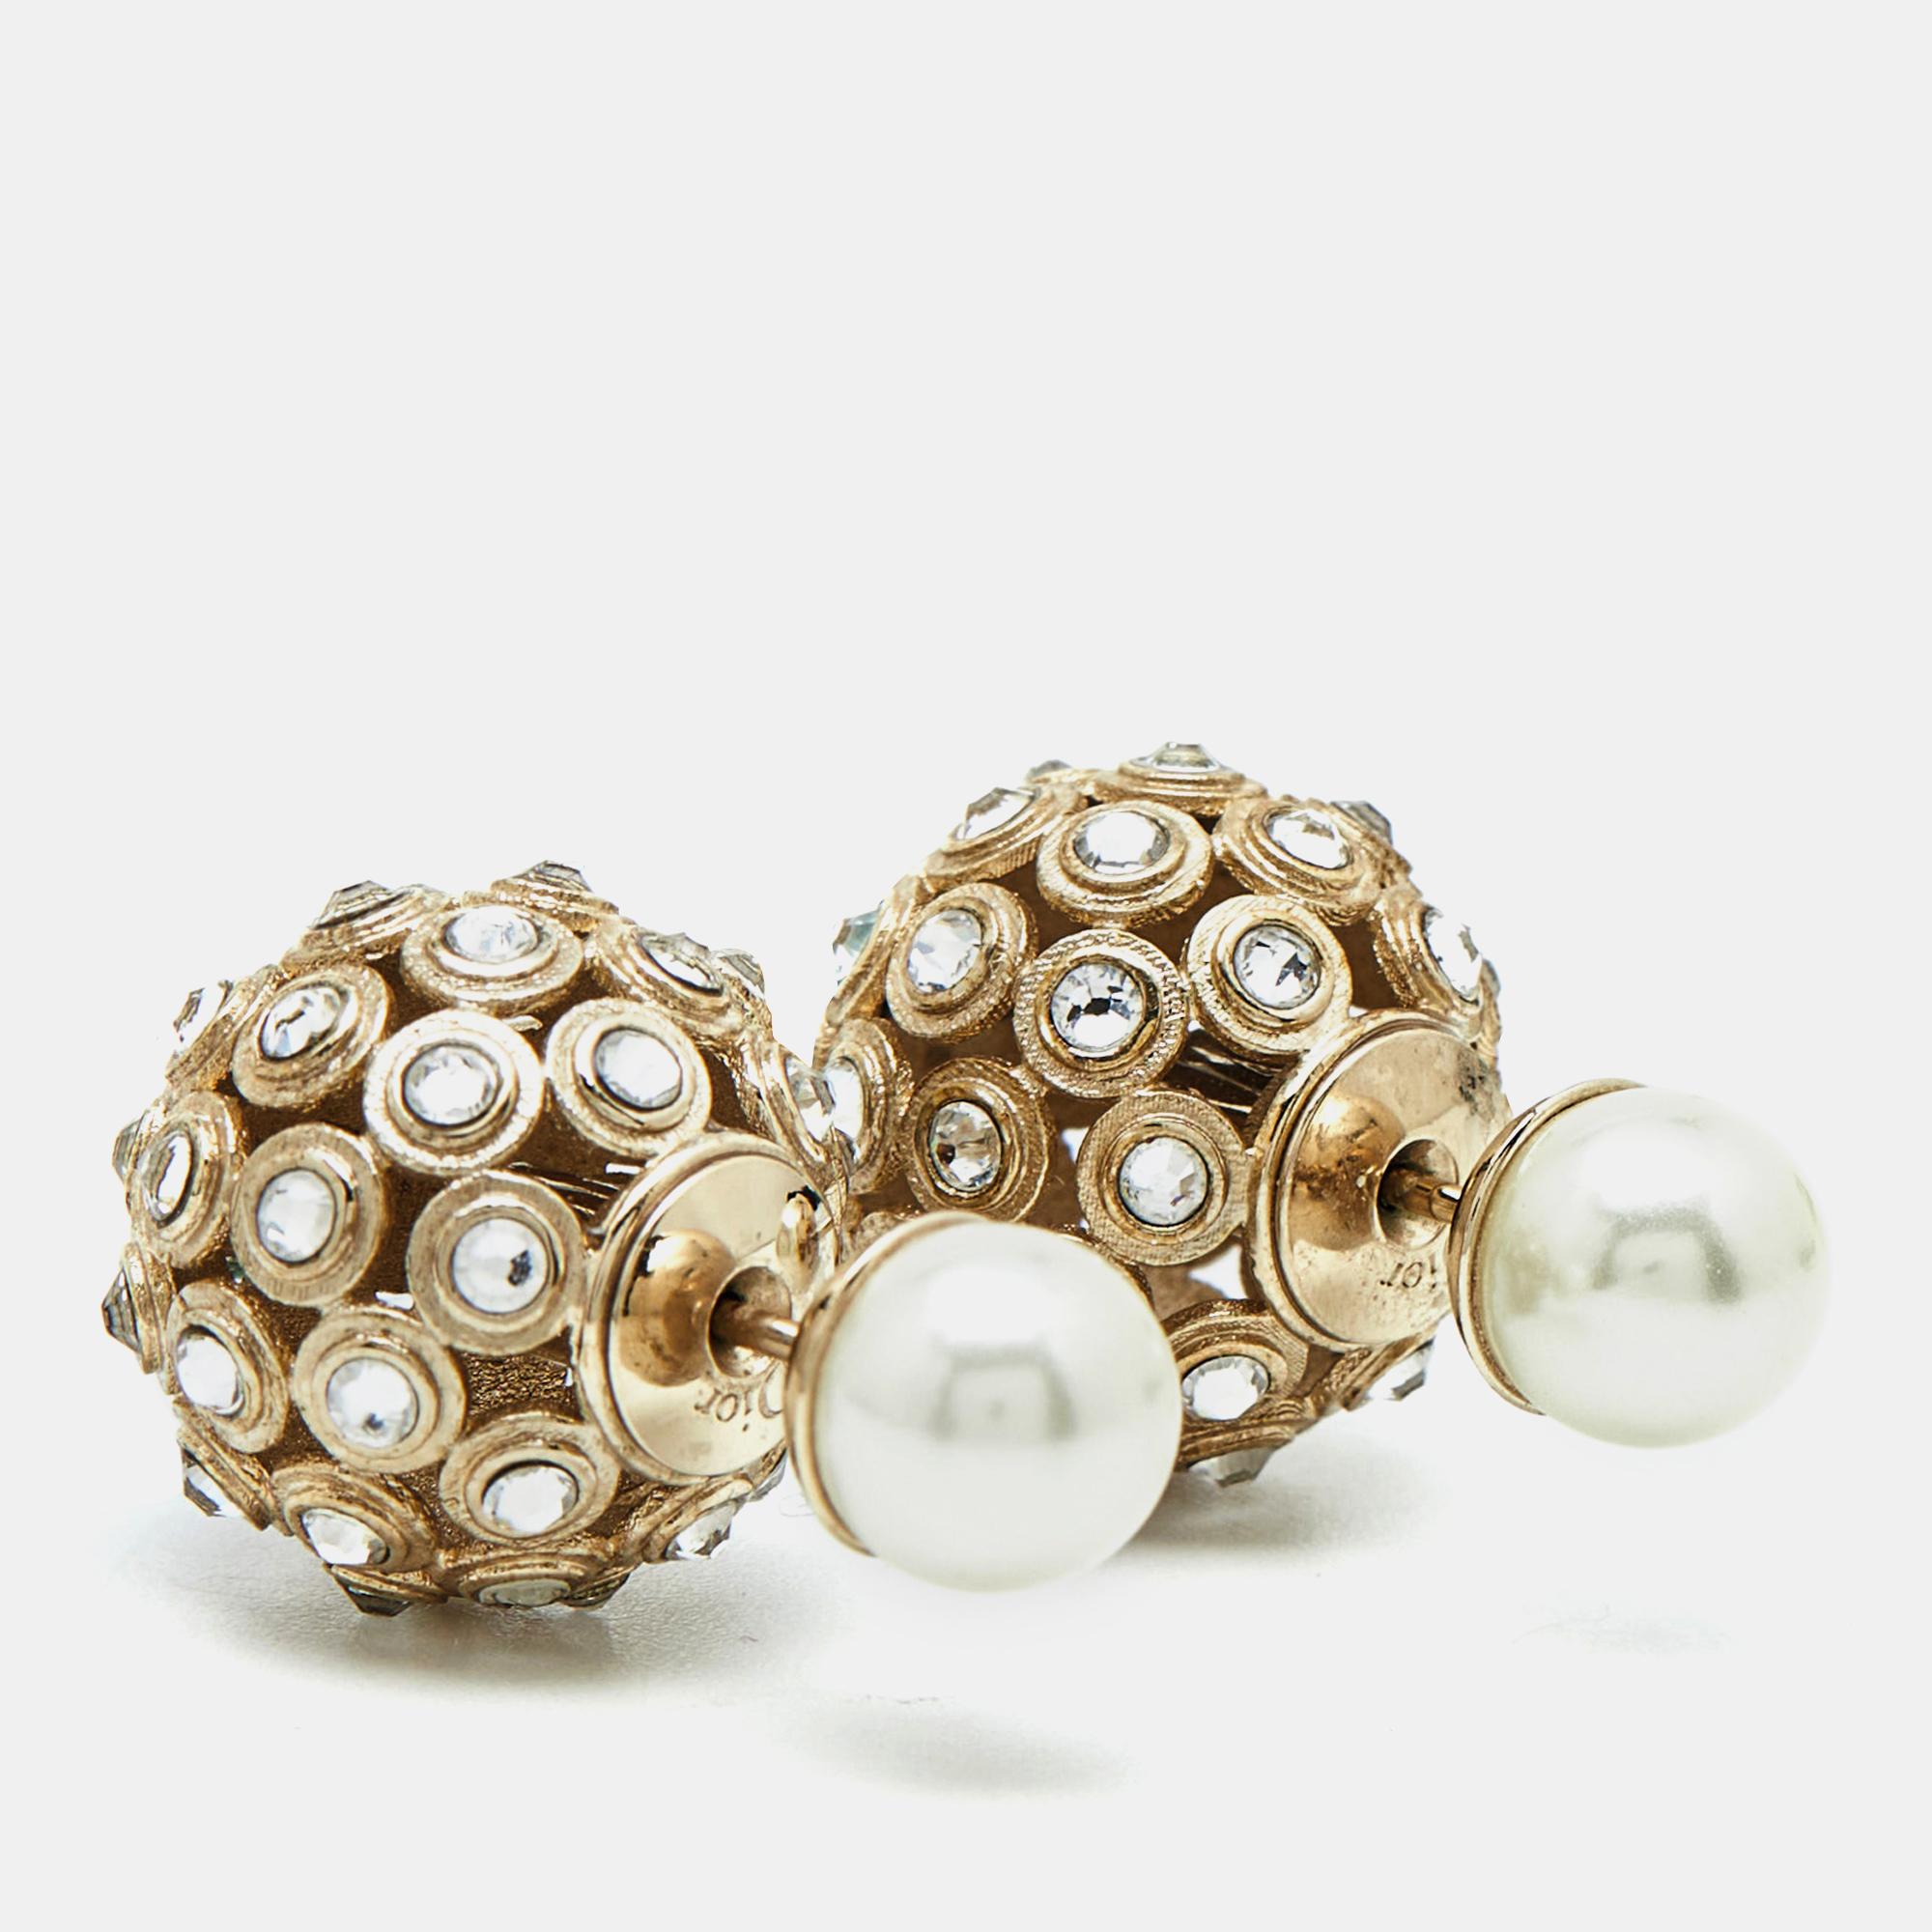 This pair of studs from Dior is made from high-quality metal in contrasting tones that will look classic on formal dresses. The polished, small, and round stud on the top offers a neat appearance while the bulging bulb on the back adds extravaganza